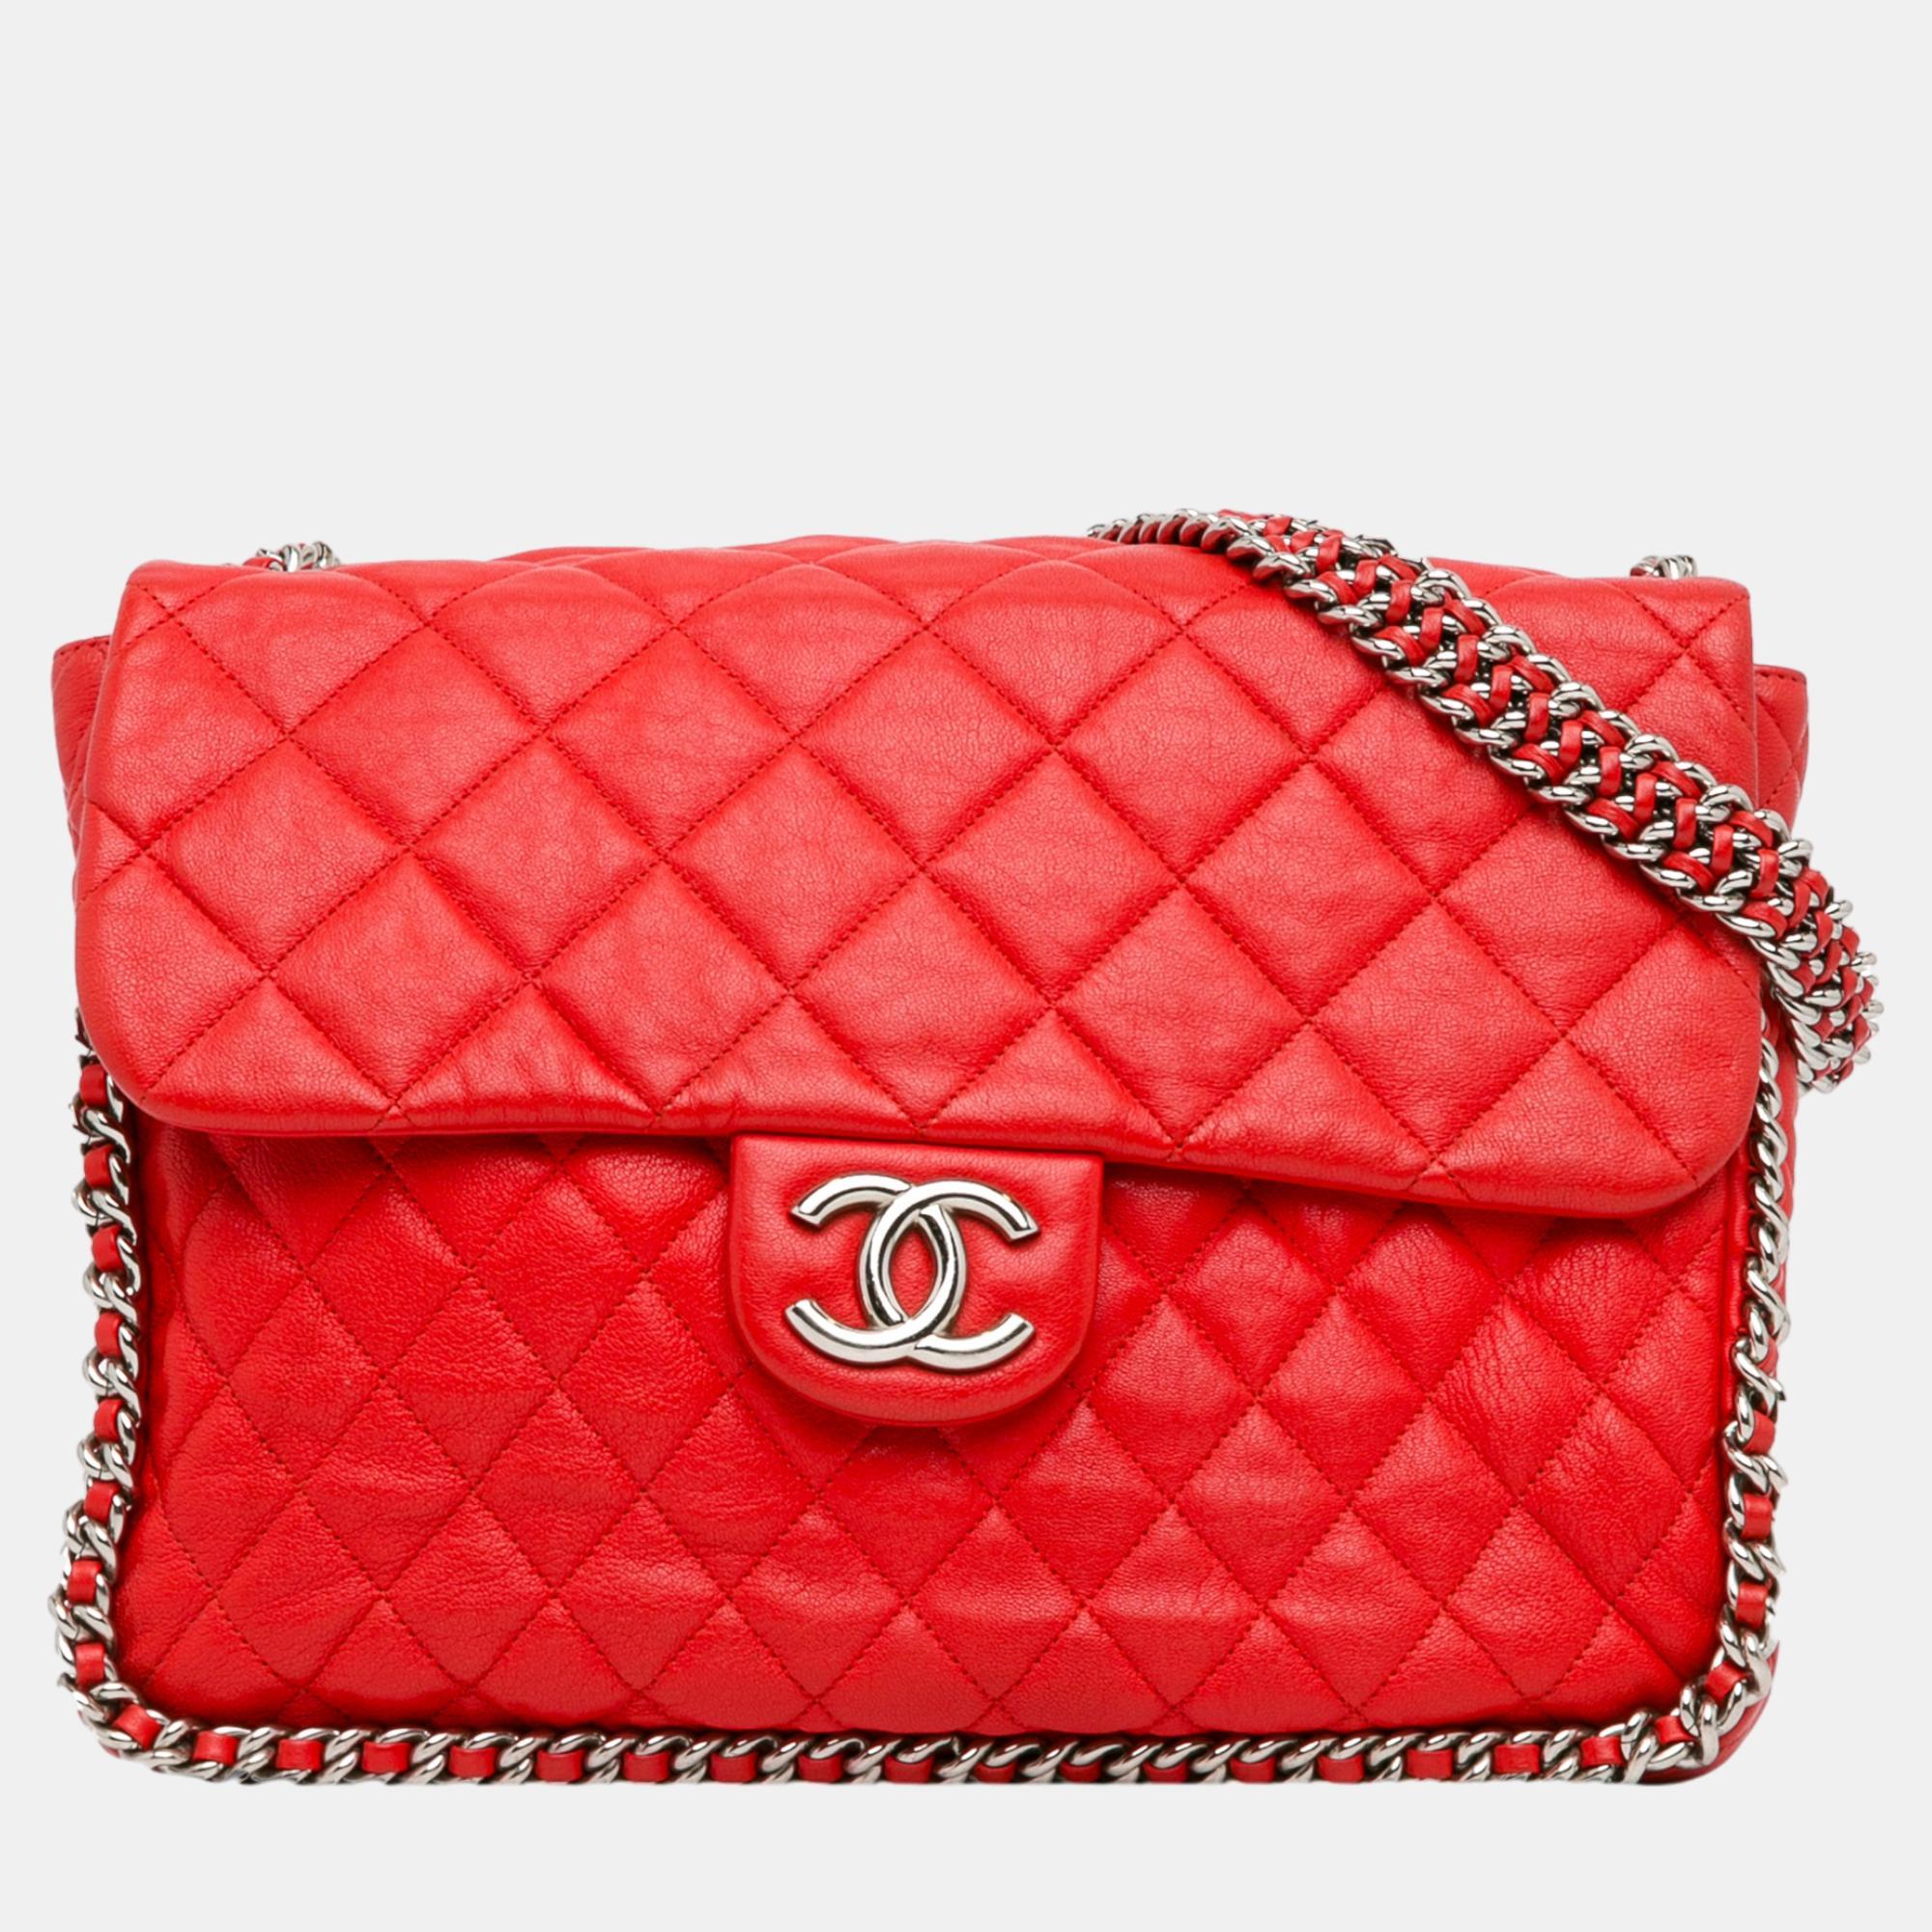 Chanel red maxi washed lambskin chain around flap